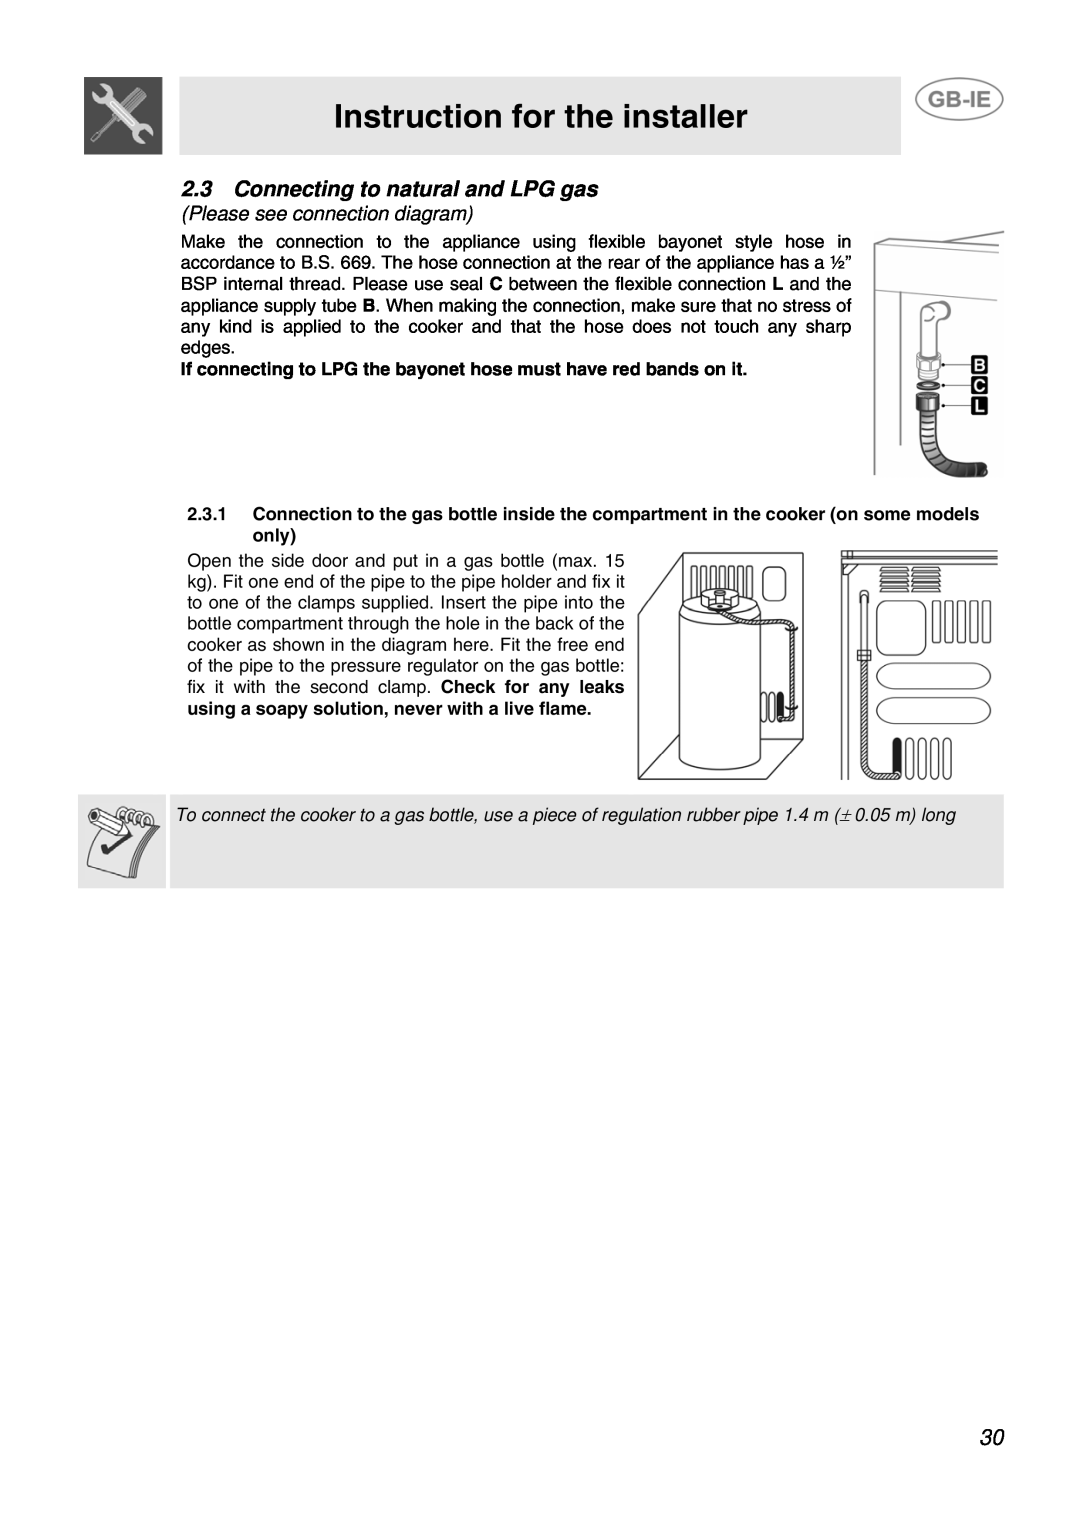 Smeg JGB95XD1S manual 2.3Connecting to natural and LPG gas, Instruction for the installer, Please see connection diagram 